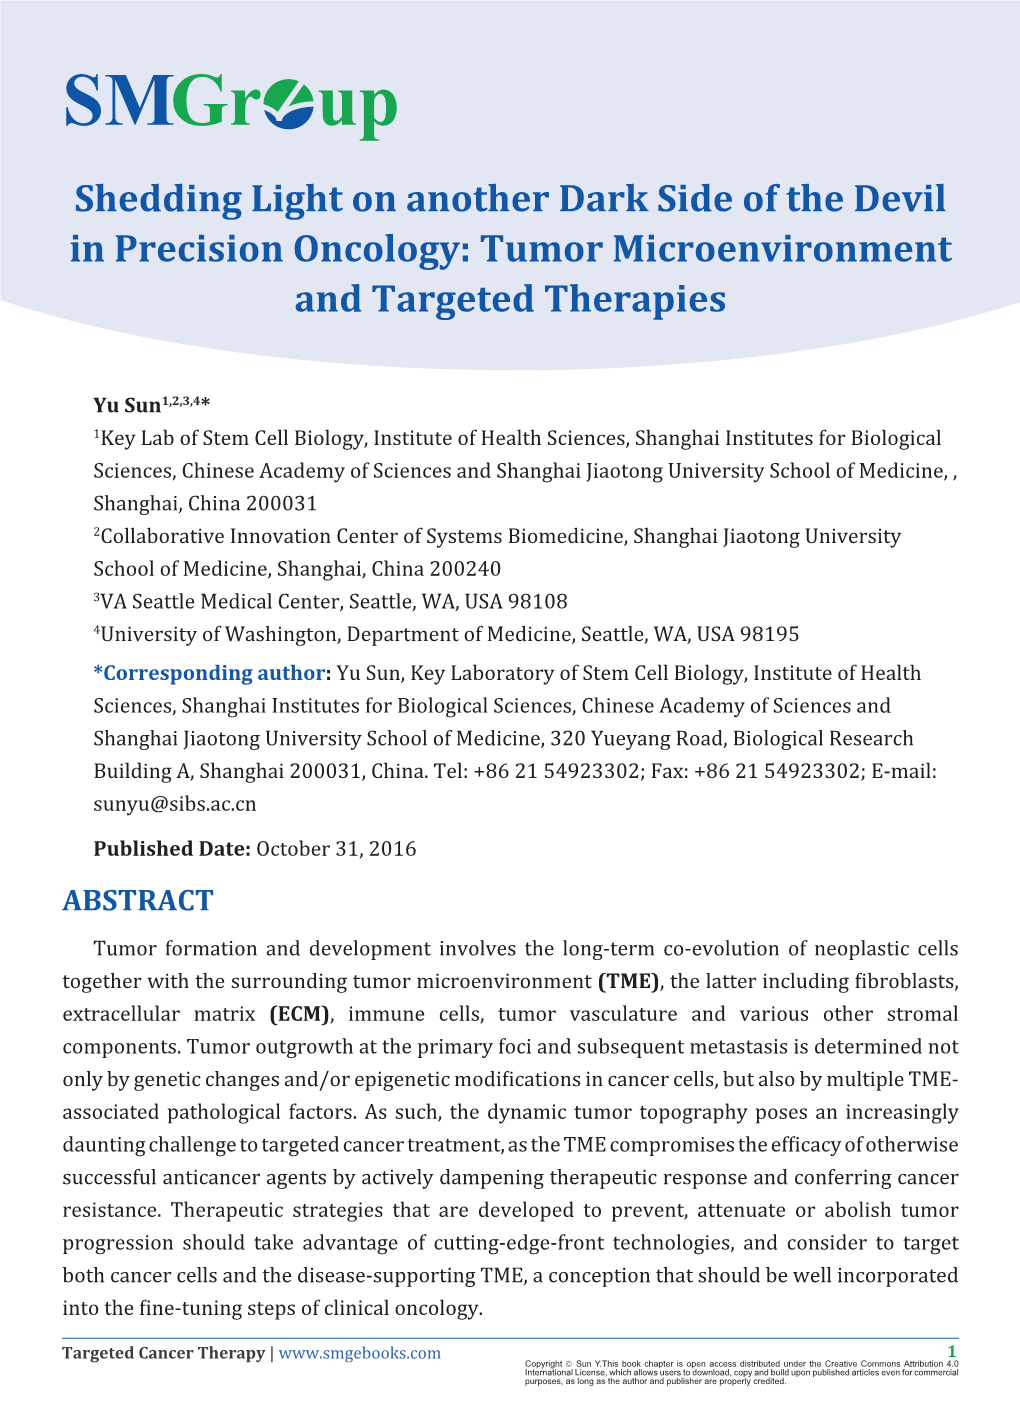 Tumor Microenvironment and Targeted Therapies